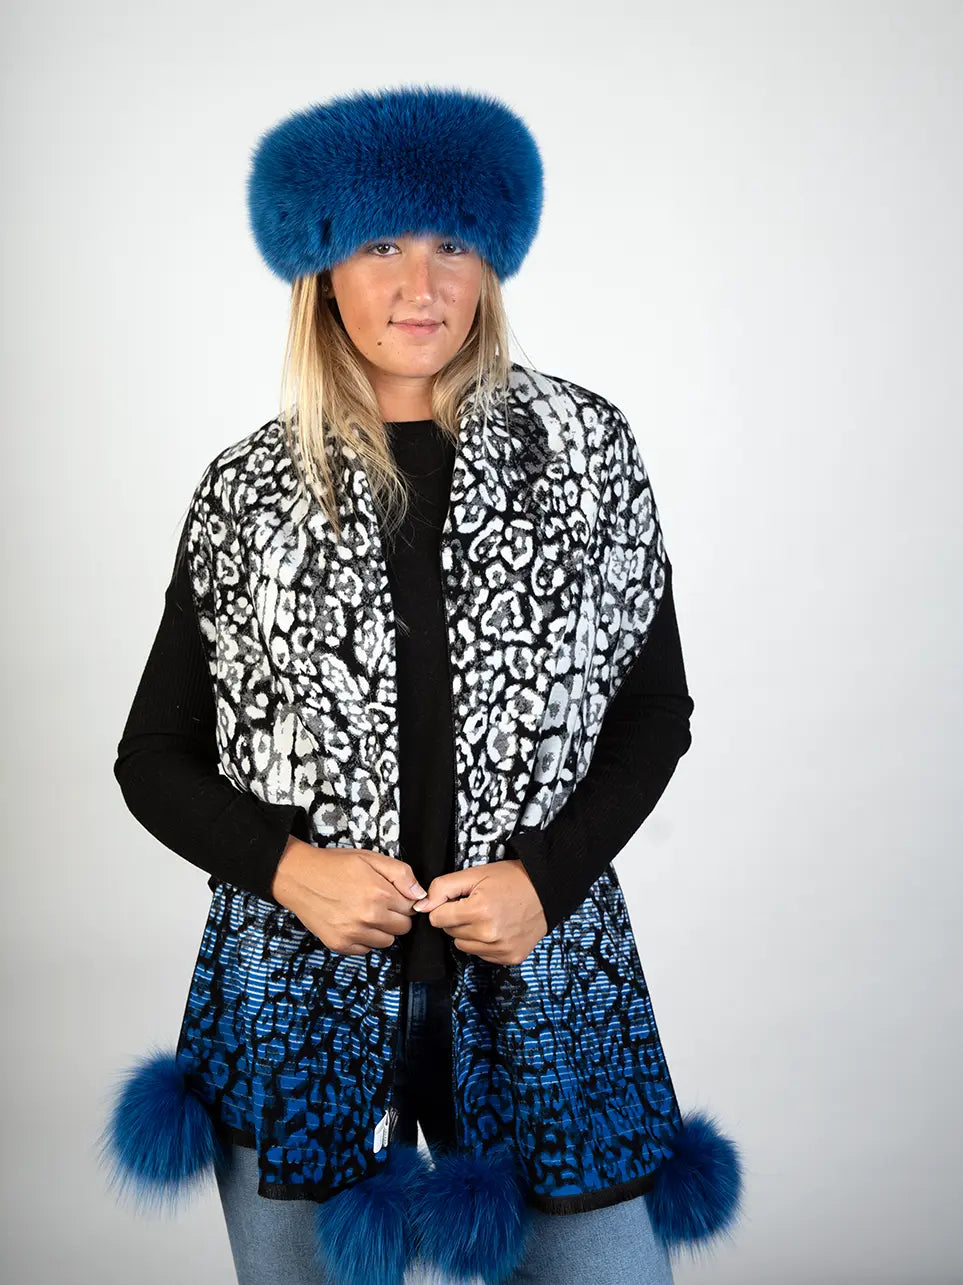 LaBelle New Collections Electric Blue Woven Leopard Print Scarf w/ PomPoms